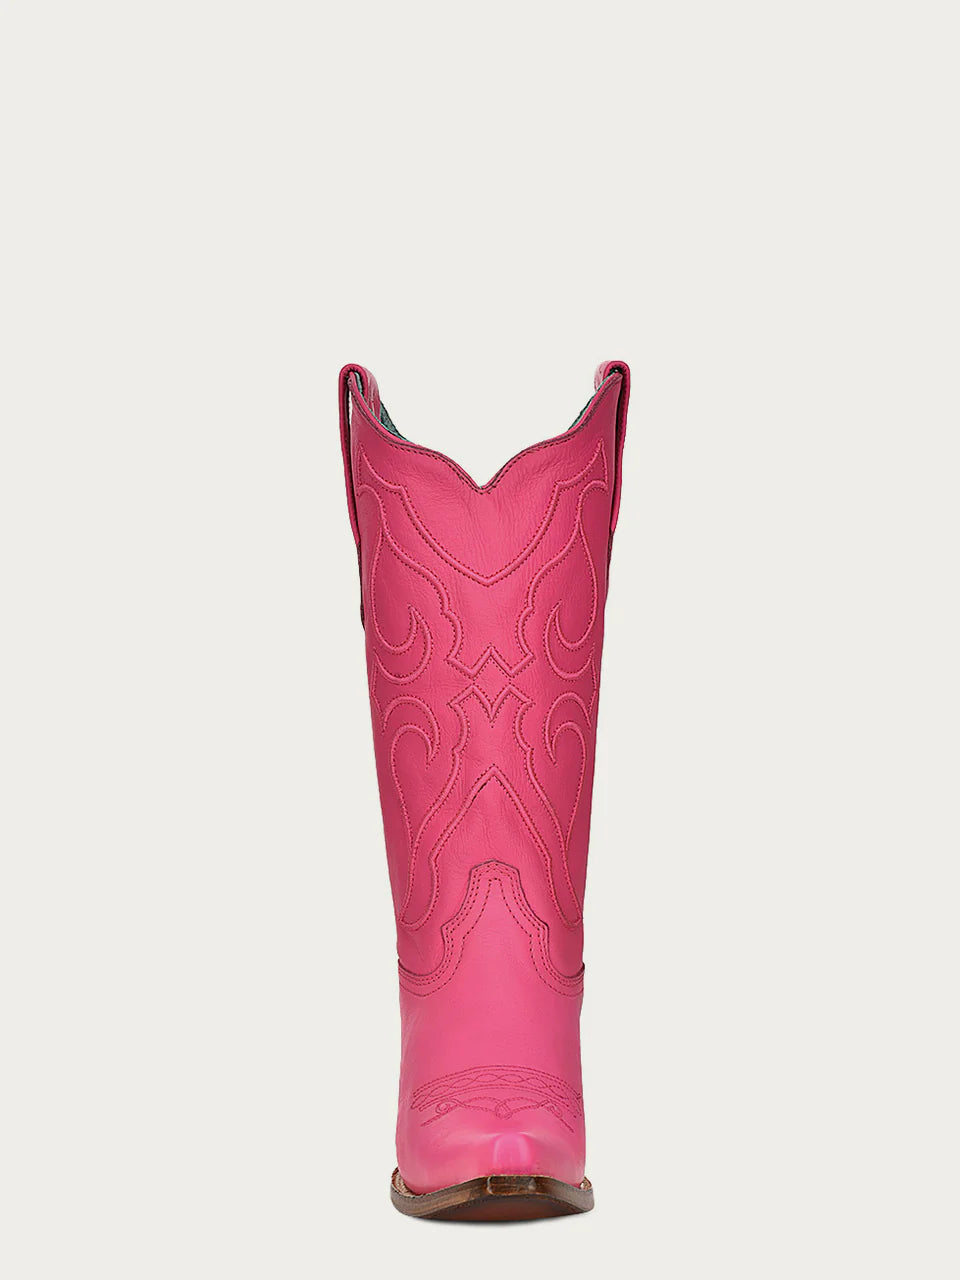 Corral Embroidered Fuchsia Pink Boots